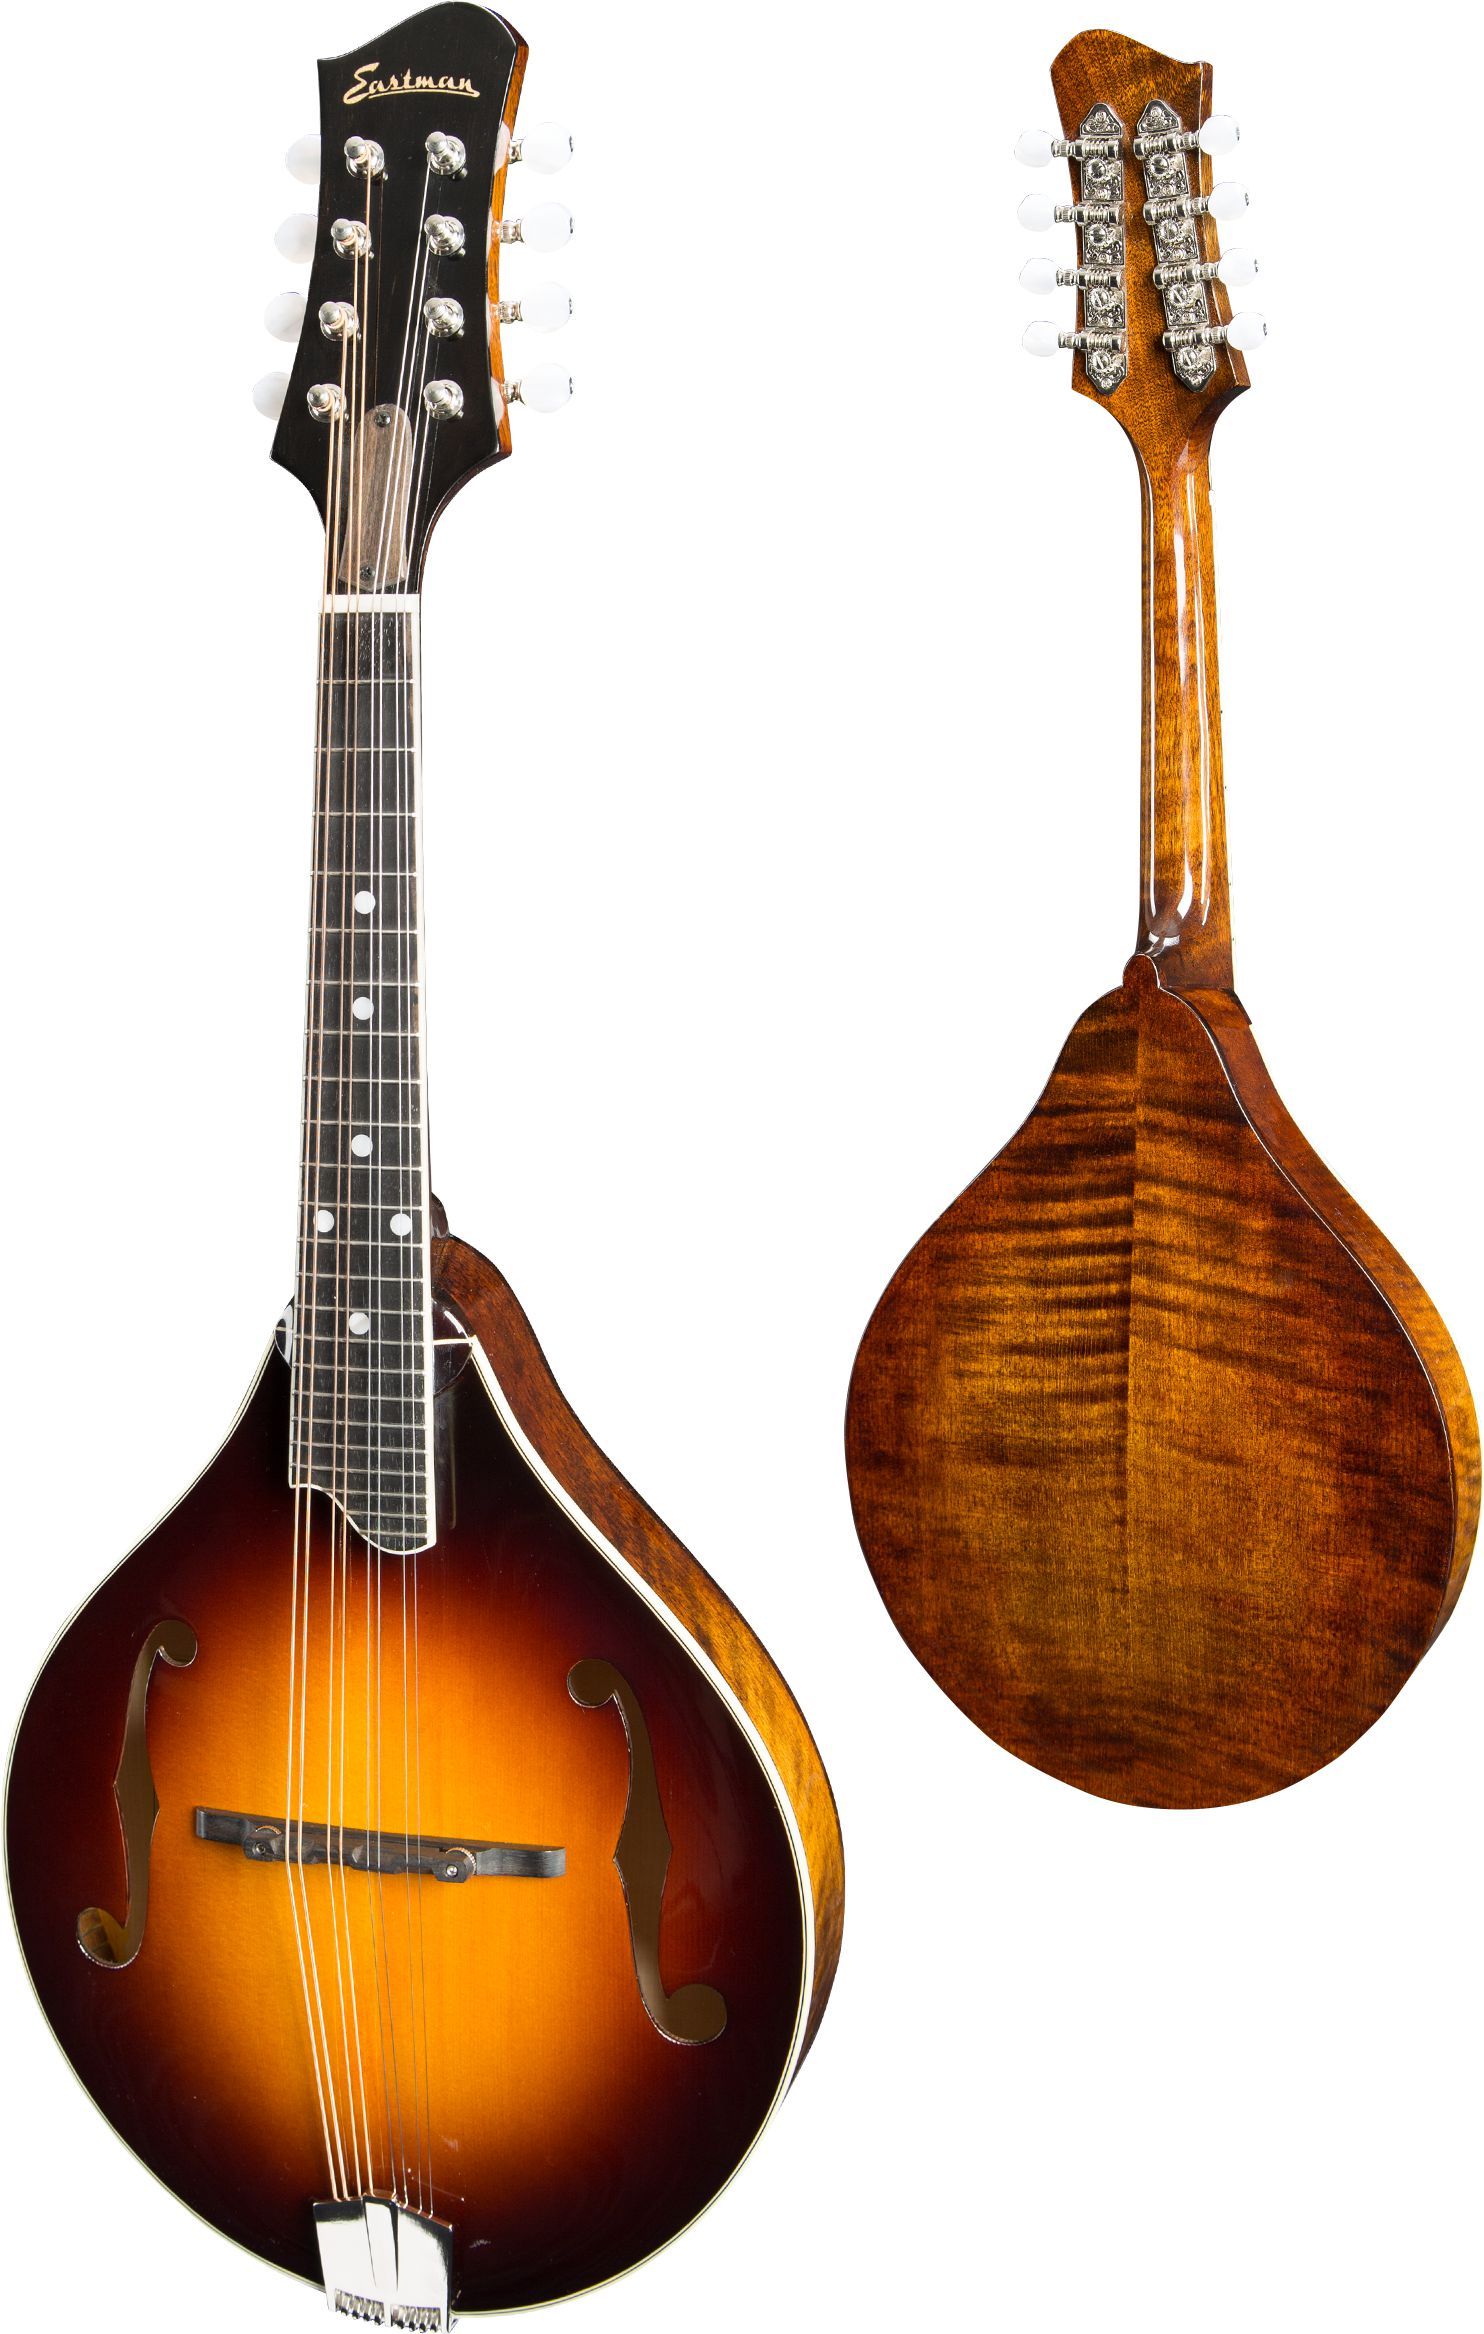 Eastman MD505 A-style F-holes Mandolin (Solid Spruce top, Solid Maple back and sides, w/Case), Mandolin for sale at Richards Guitars.